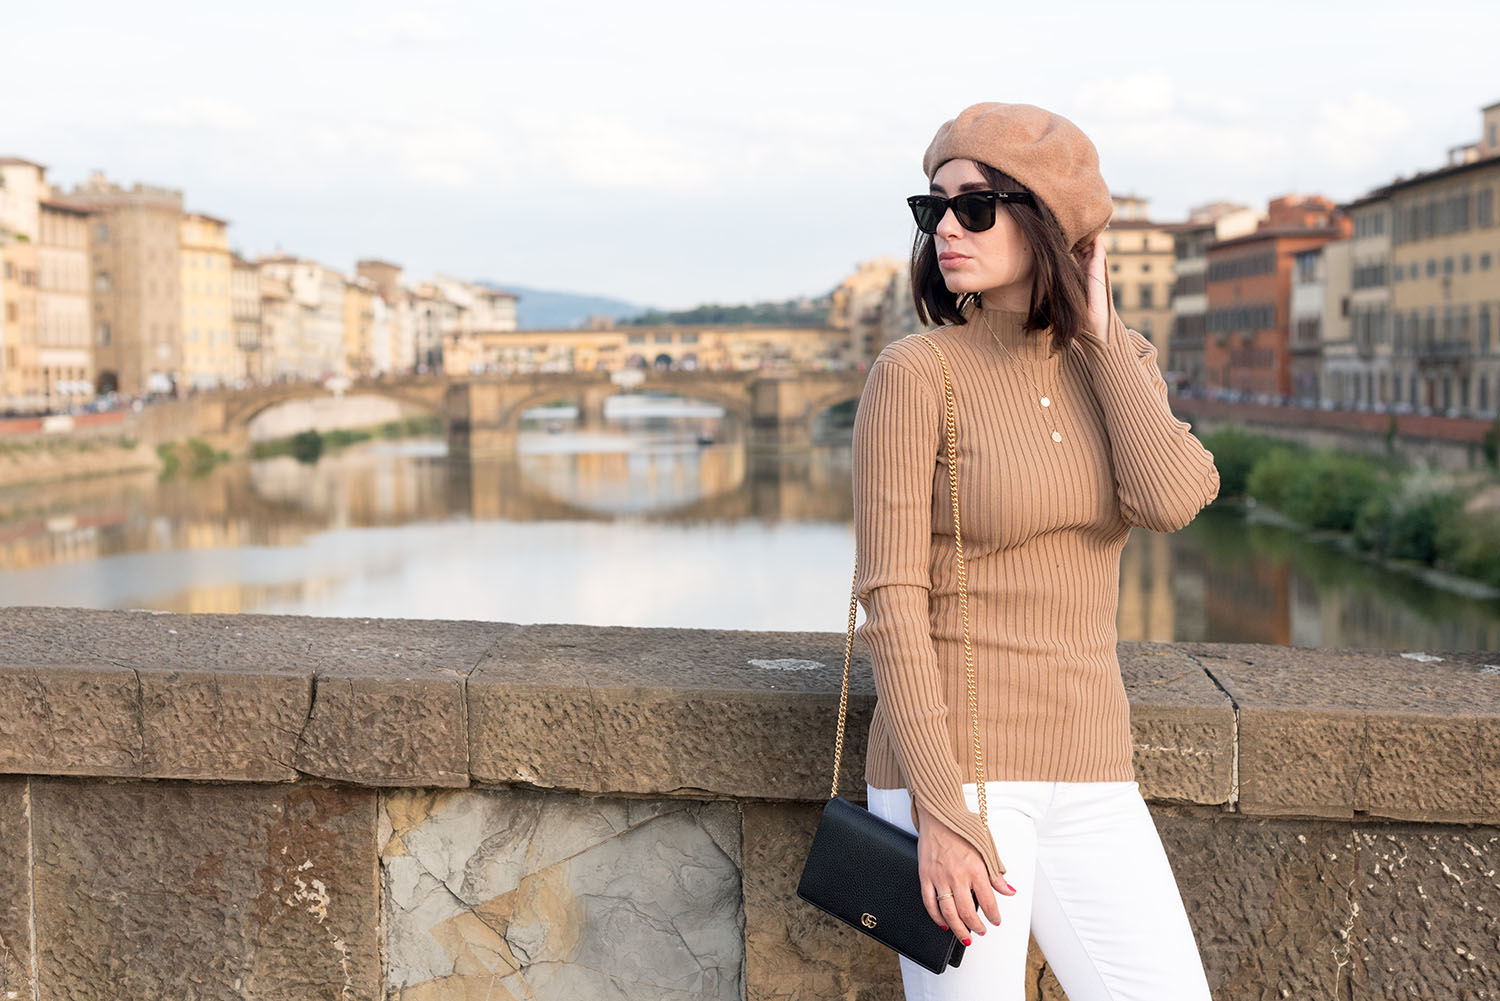 Top Canadian fashion blogger Cee Fardoe in Florence, Italy, wearing RayBan Wayfarer sunglasses and carrying a Gucci Marmont handbag